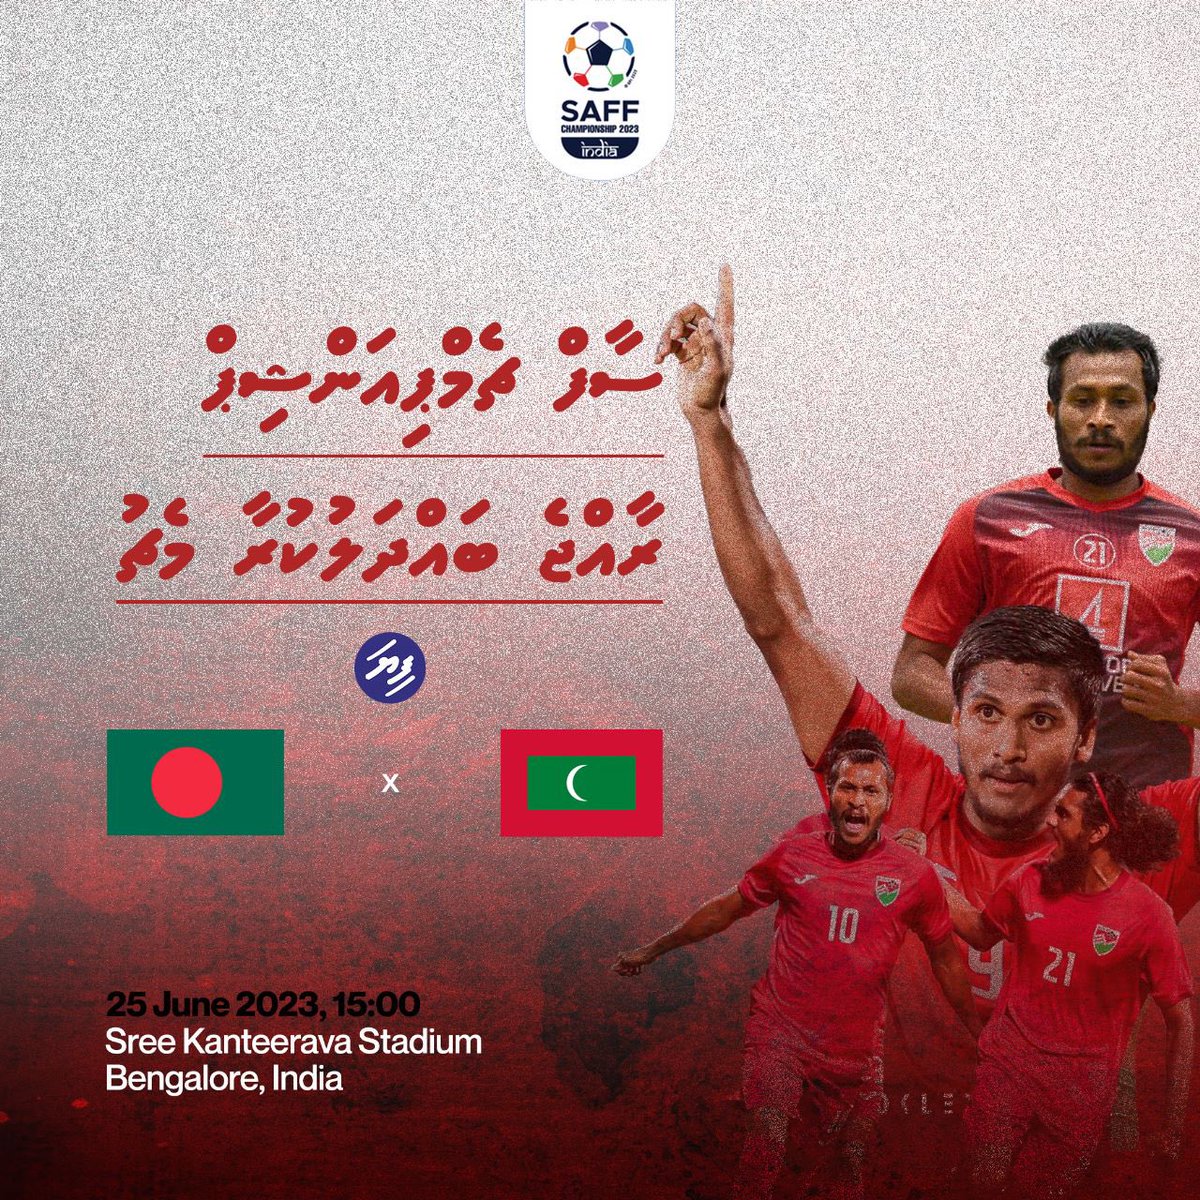 Match day is here!
Come on and cheer our team on to victory! 🙌🇲🇻💪 

#SAFFChampionship #TeamMaldives #BML  #MatchDay2